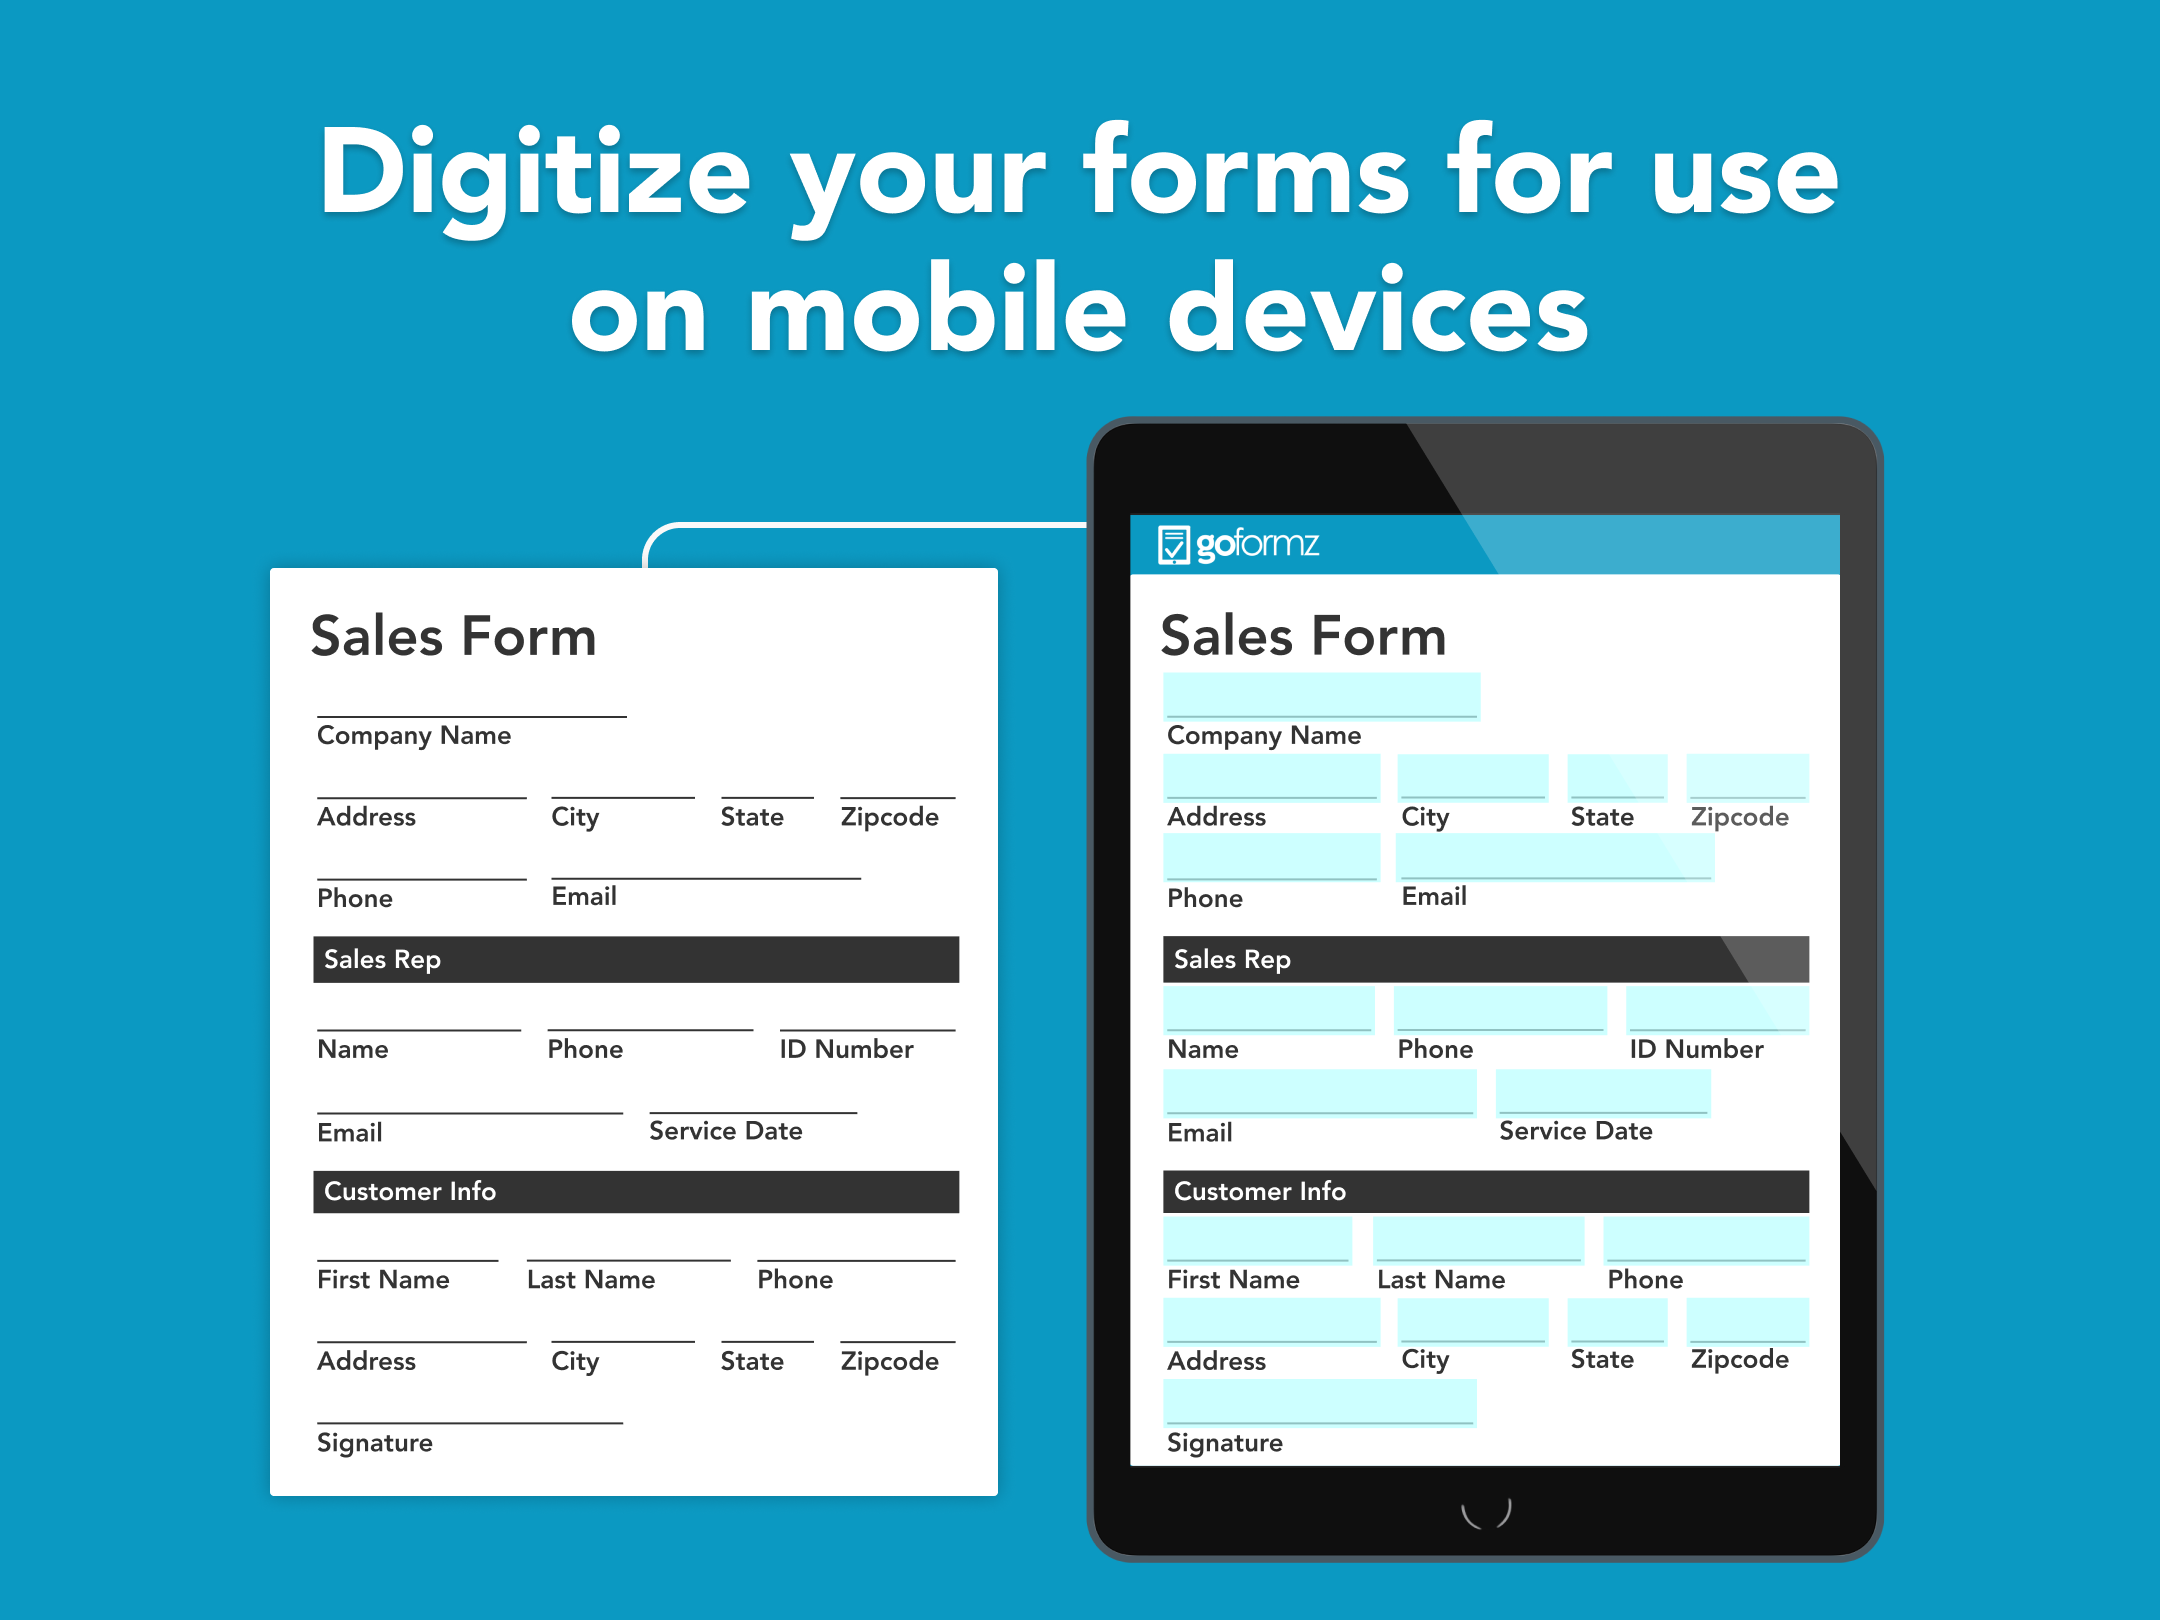 Digitize your forms for use on computers and mobile devices